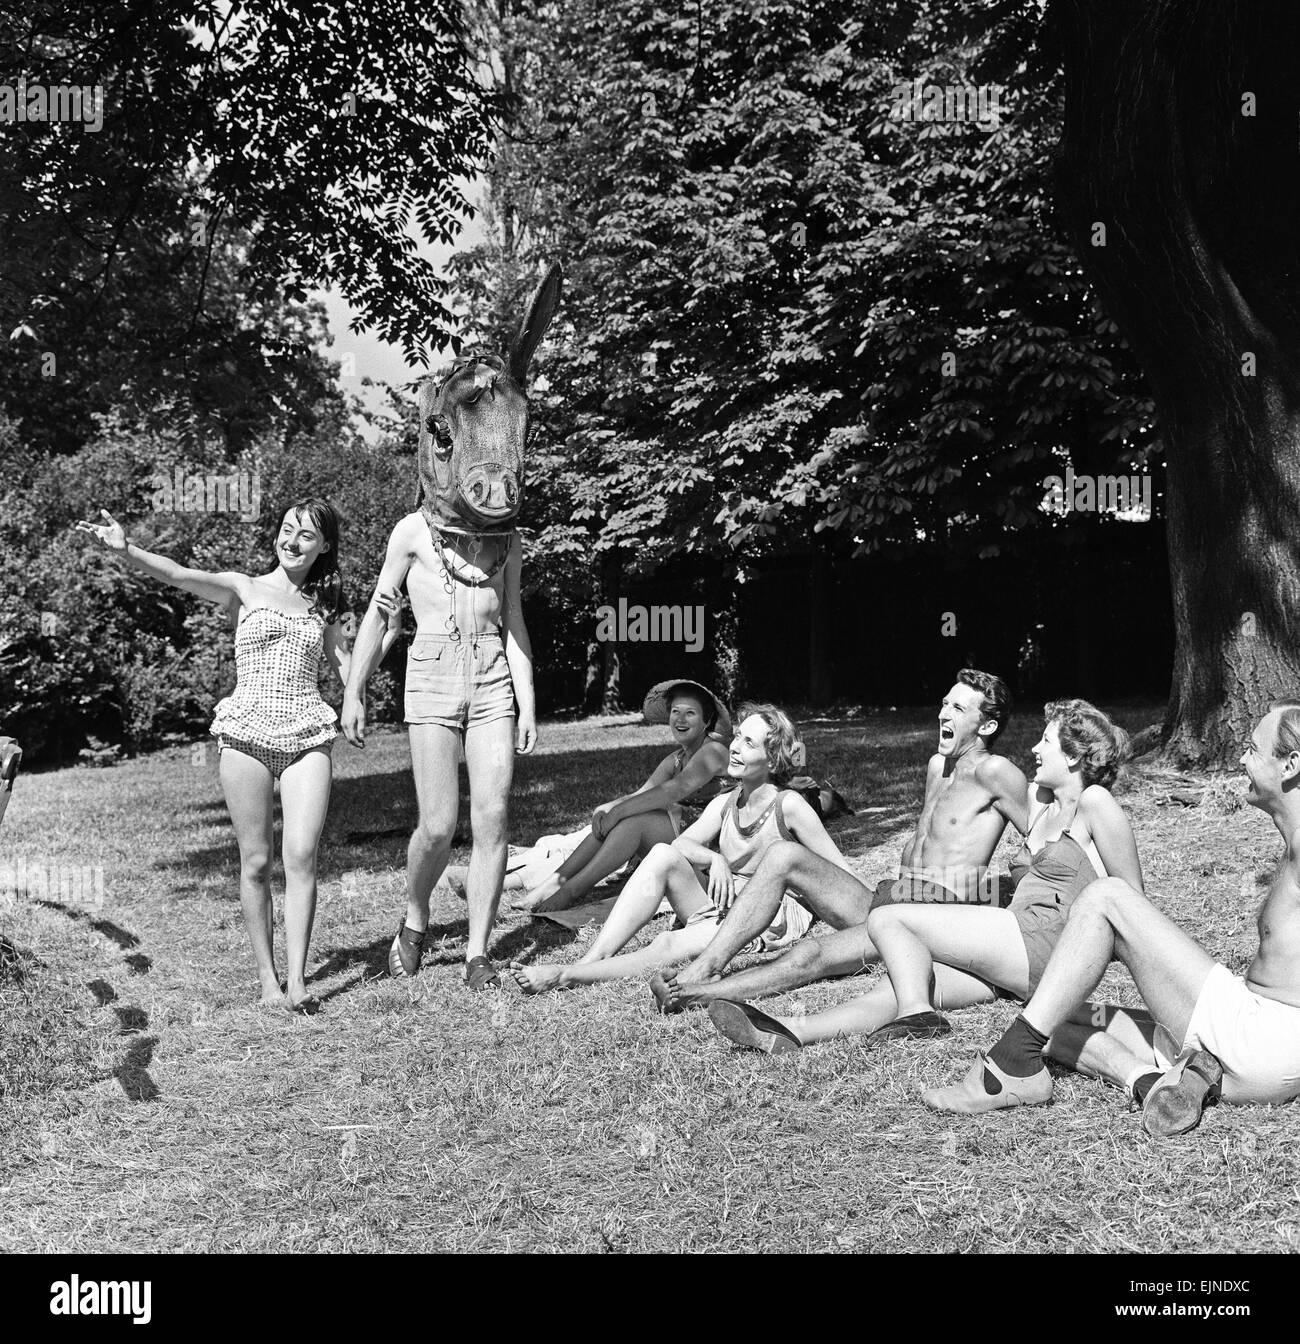 Rehearsal for the new Open Air Theatre production of Willam Shakespeare's ' A Midsummer Night's Dream' at Regents Park, London with cast members dressed in bathing costumes. Picture shows: 'Titania' played by Mary Duddy, taking a stroll with Pete John who stood in for 'Bottom' to be played by producer and director Robert Atkins. 8th July 1959. Stock Photo